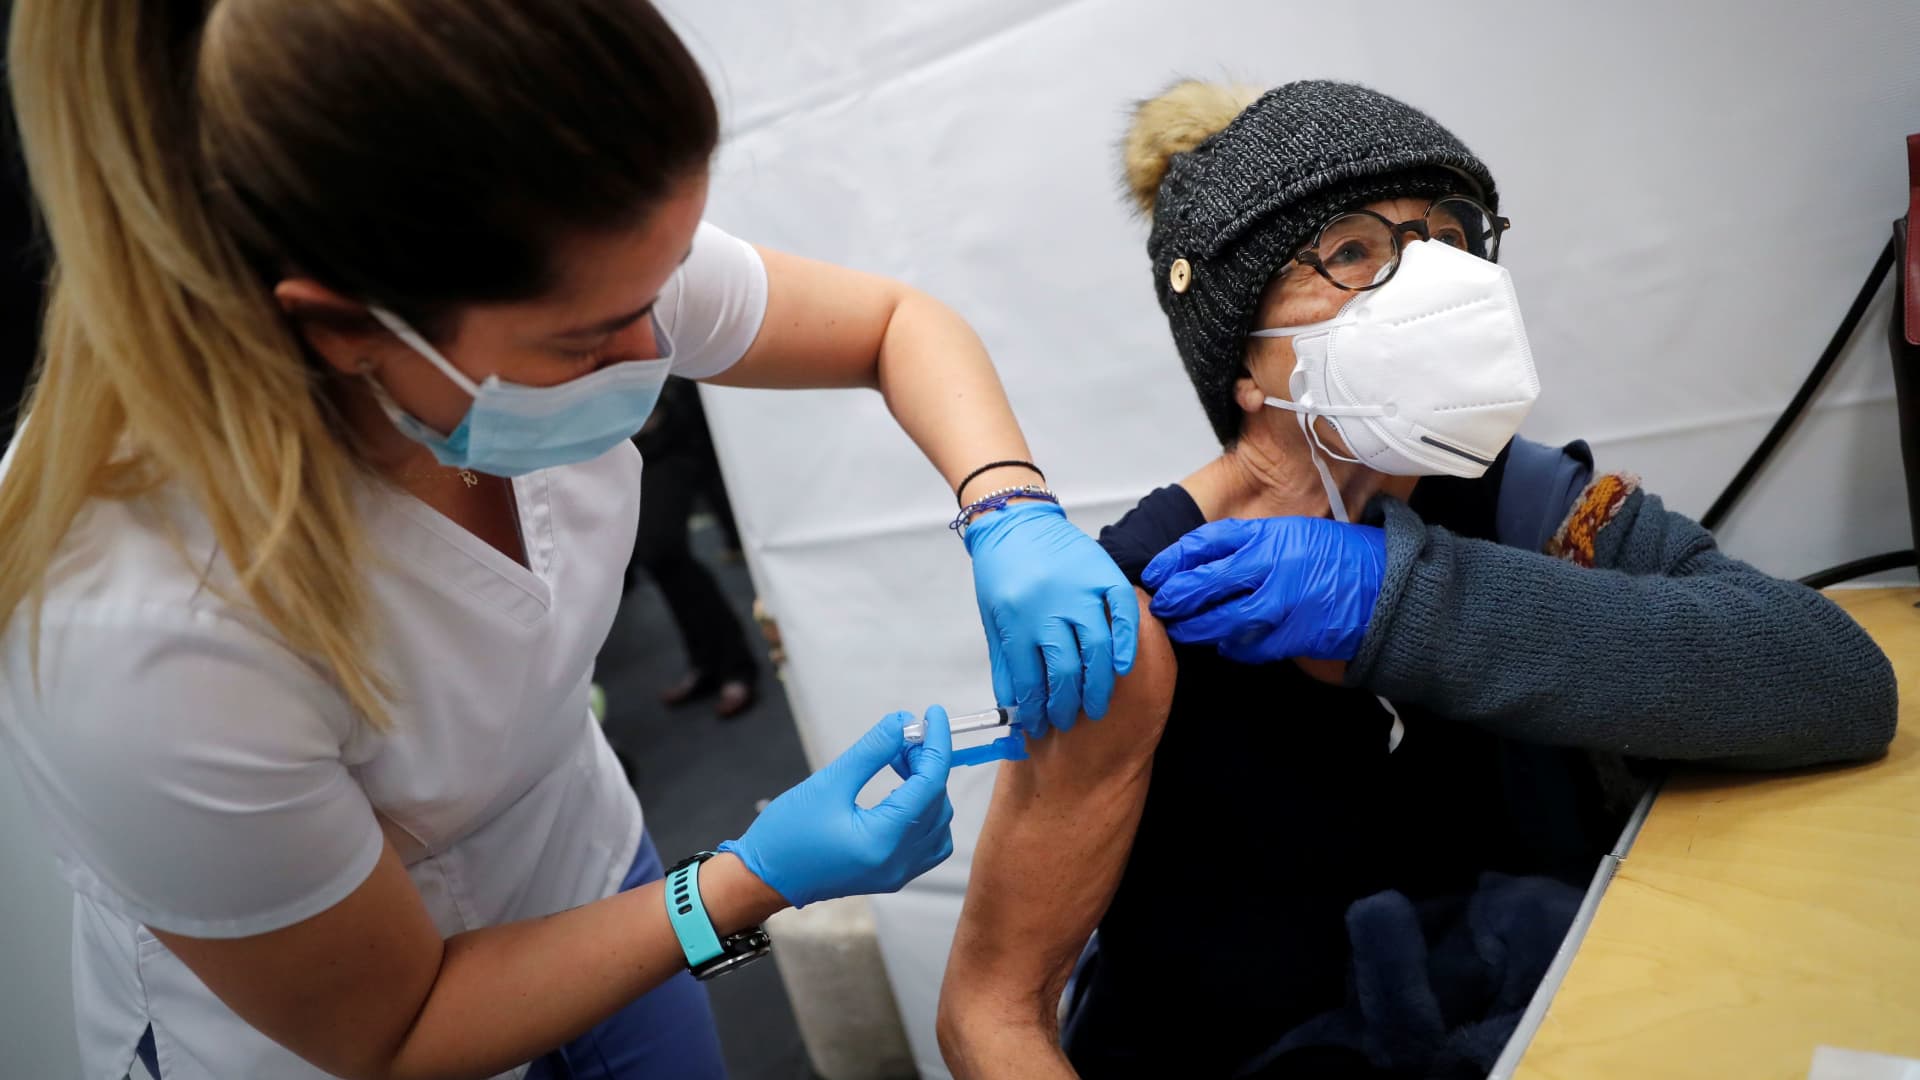 A healthcare worker administers a shot of the Moderna COVID-19 Vaccine to a woman at a pop-up vaccination site operated by SOMOS Community Care during the coronavirus disease (COVID-19) pandemic in New York, January 29, 2021.